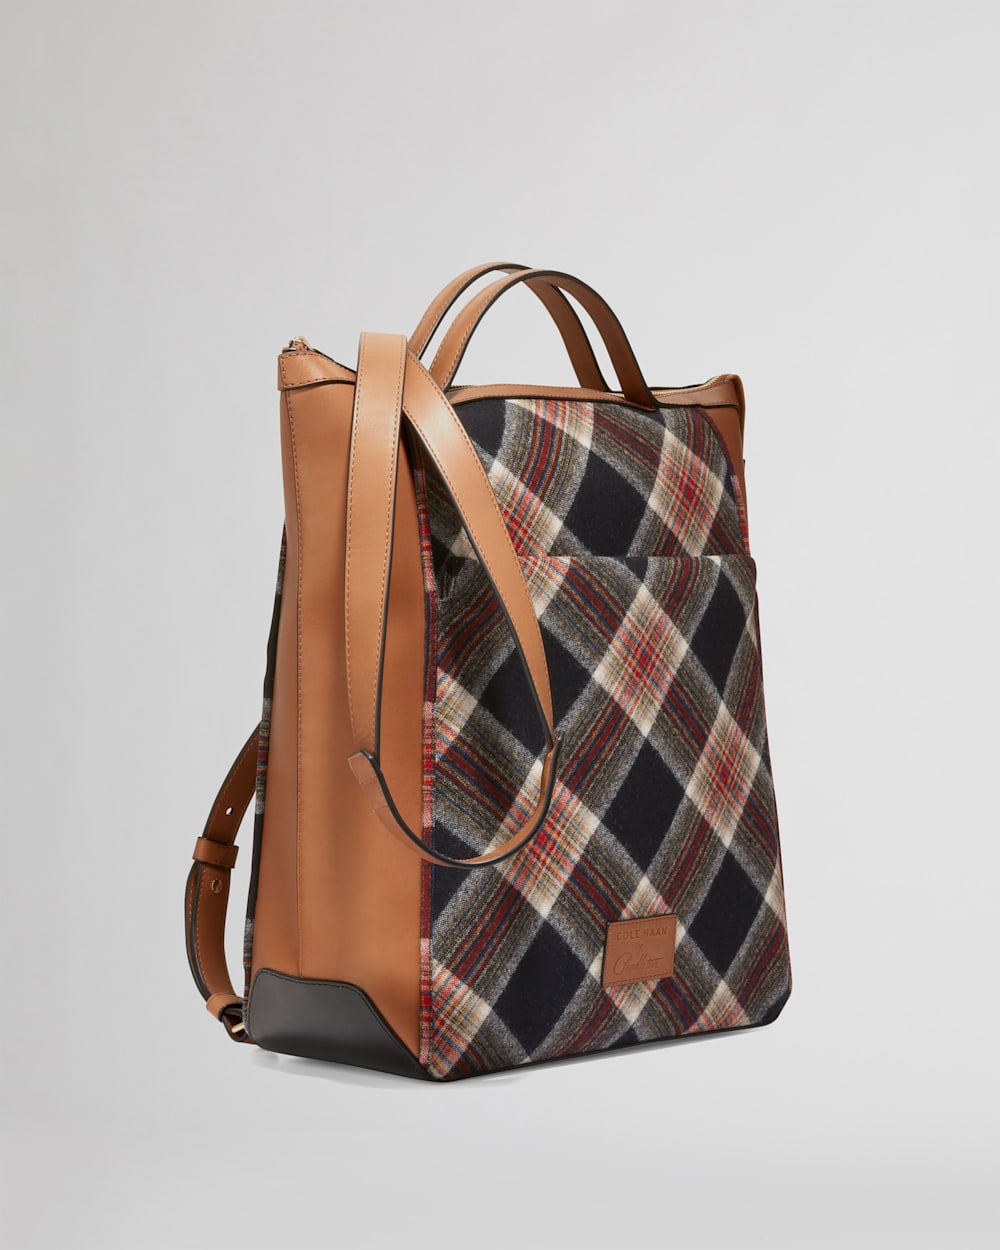 ALTERNATE VIEW OF COLE HAAN X PENDLETON GRAND AMBITION BACKPACK IN ACADIA PLAID image number 2